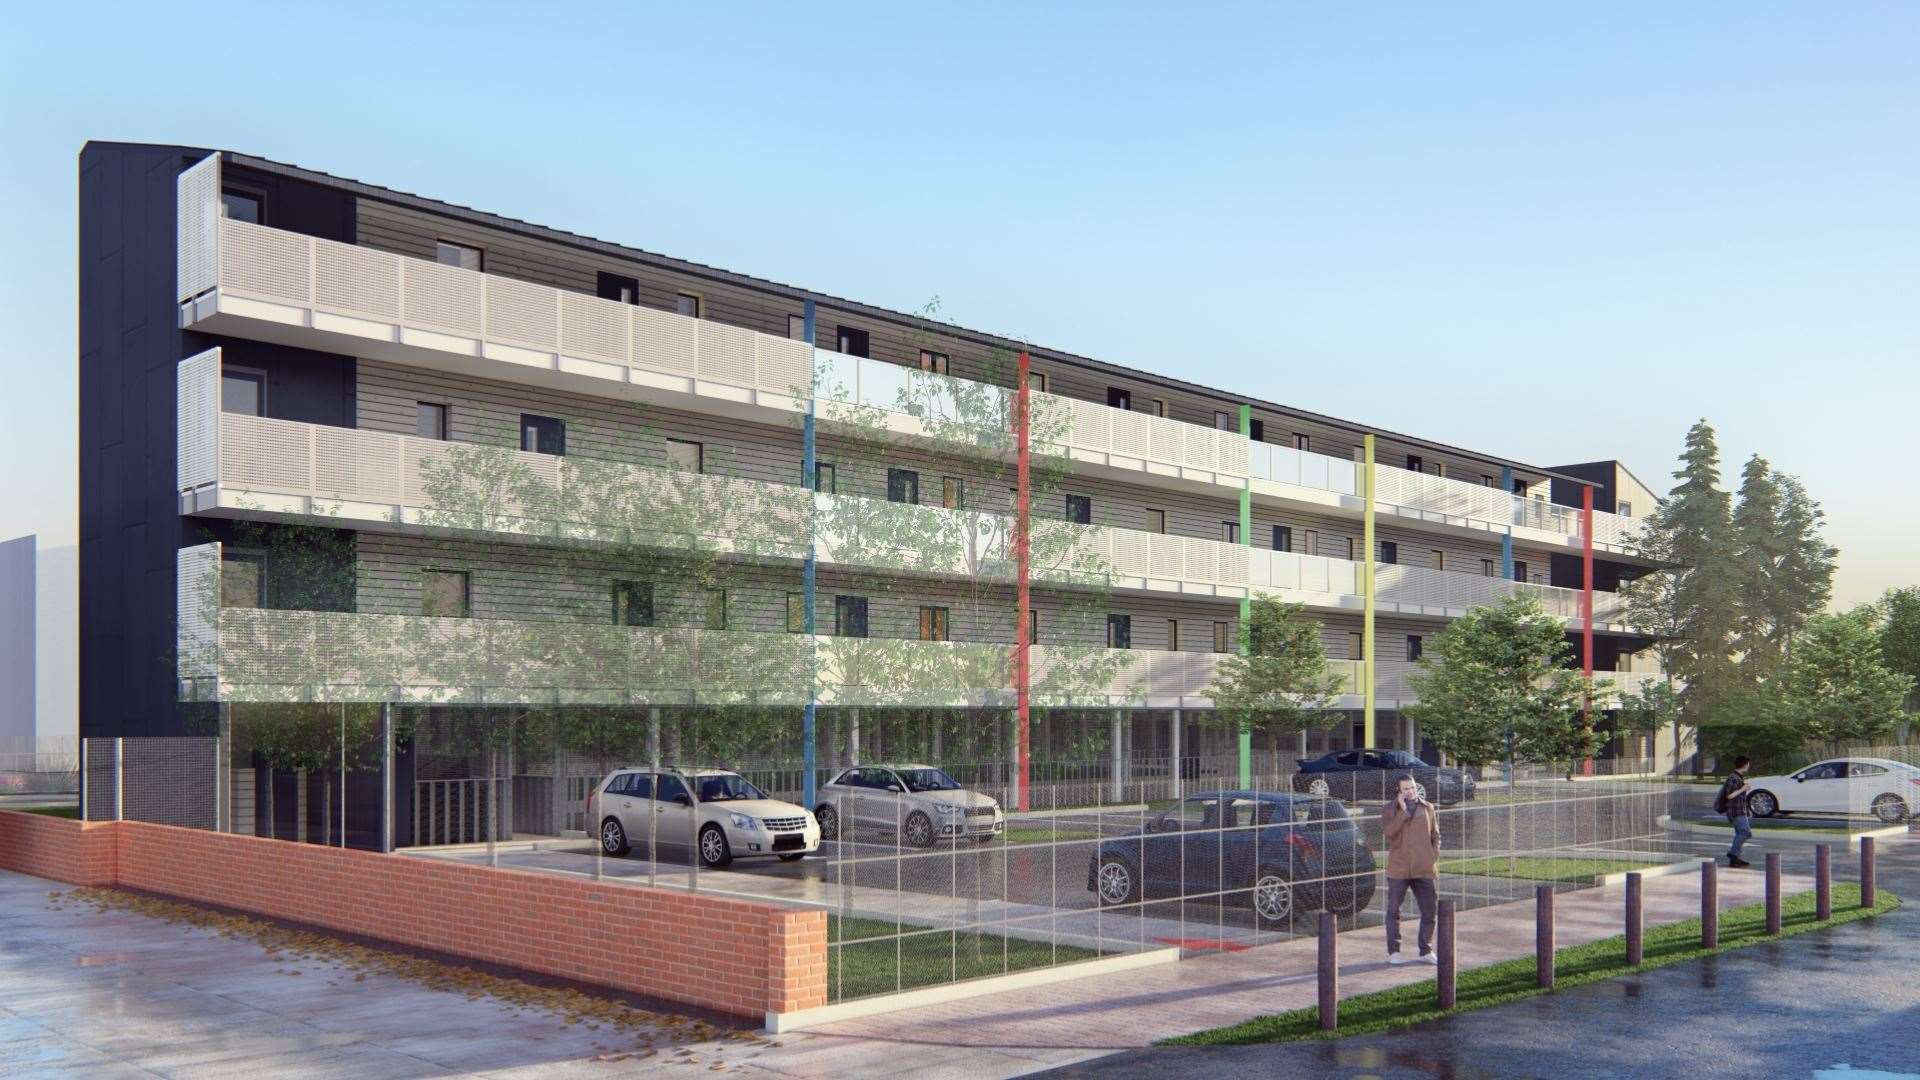 CGI of the temporary accommodation for homeless people on under-used Henwood Road car park in Ashford